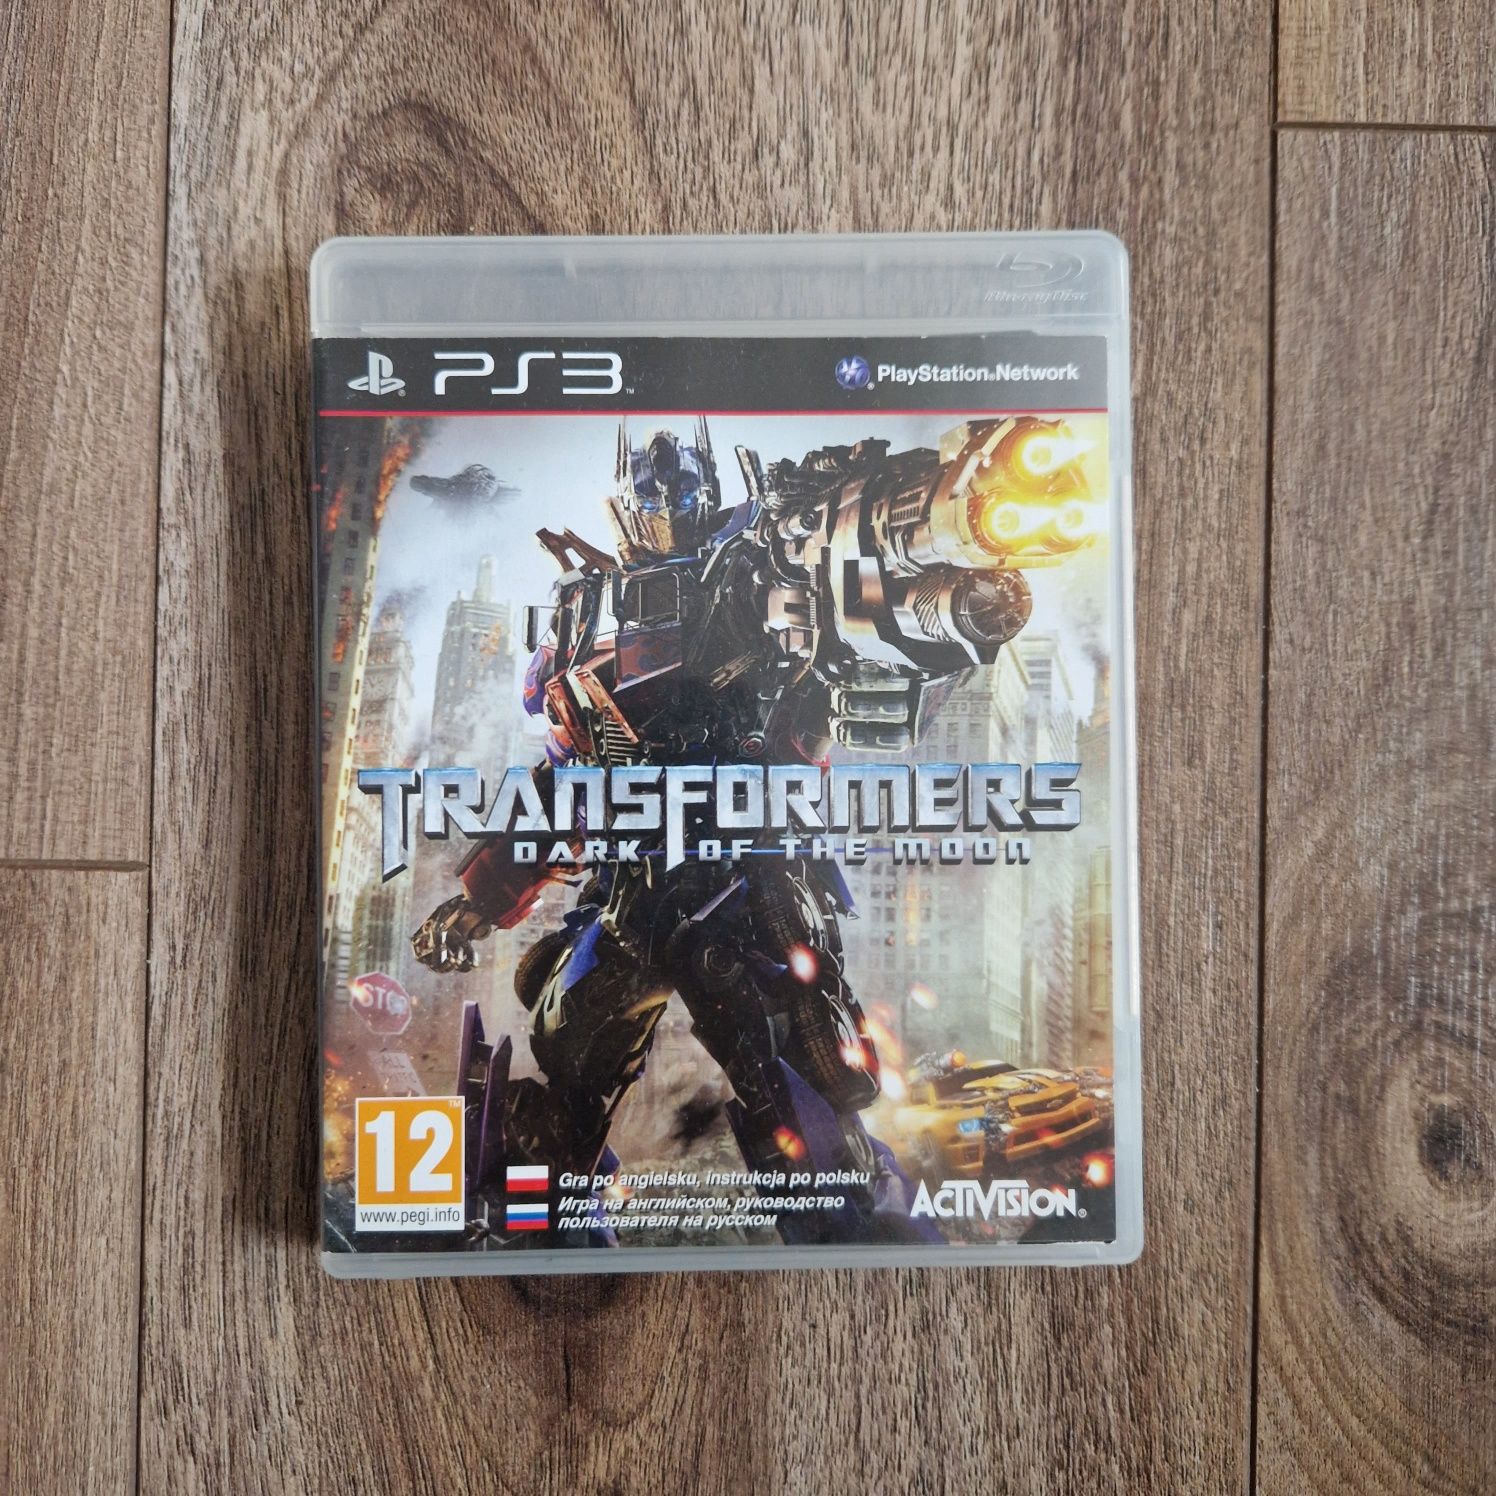 Transformers Dark of The Moon - Ps3